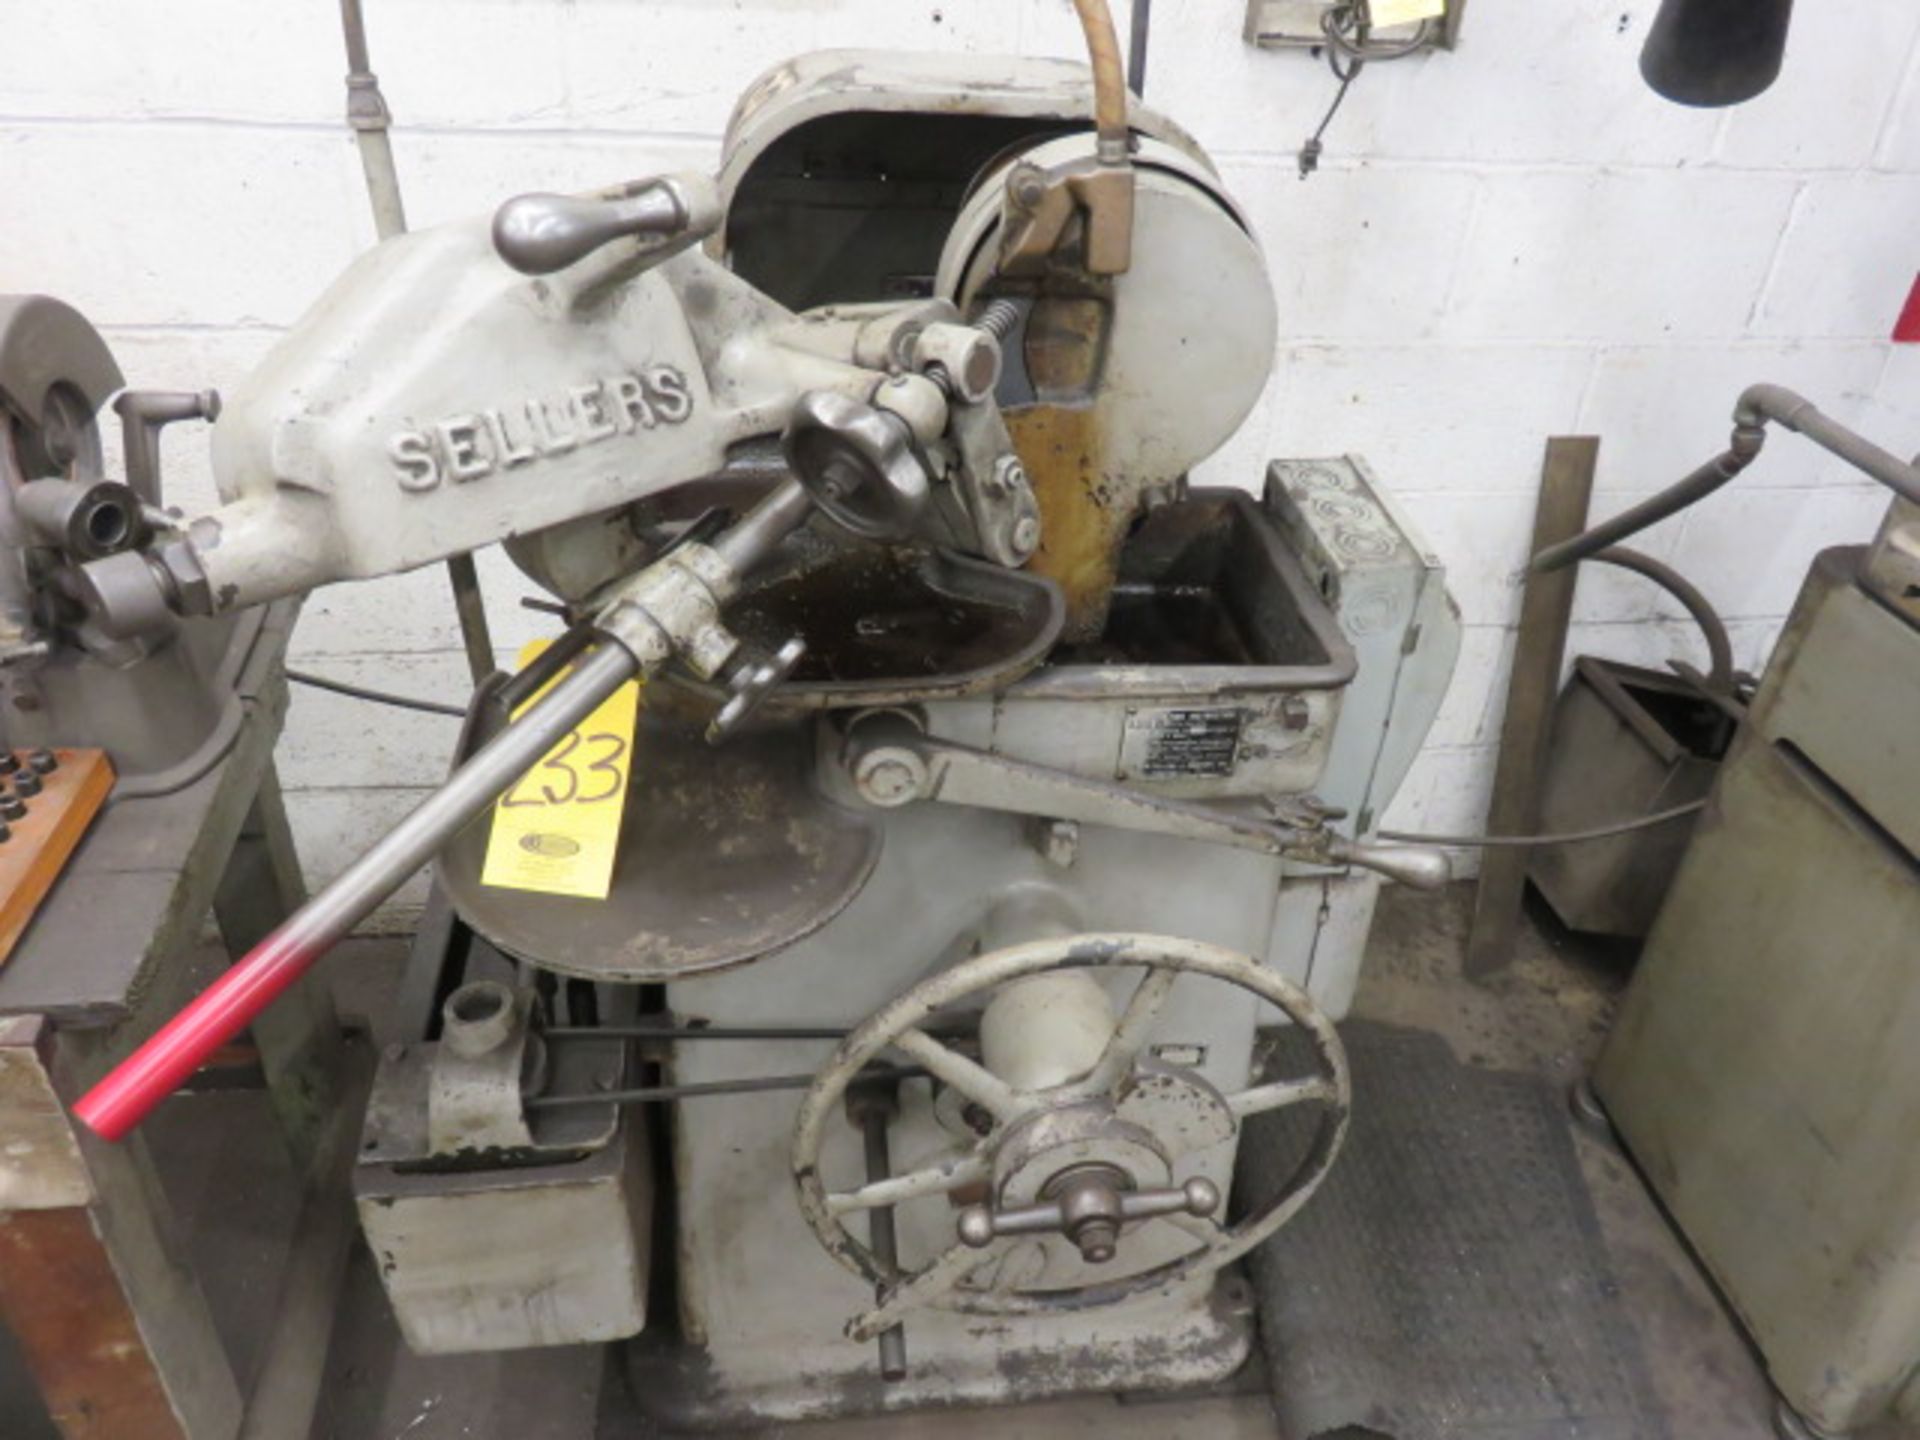 SELLERS DRILL GRINDER